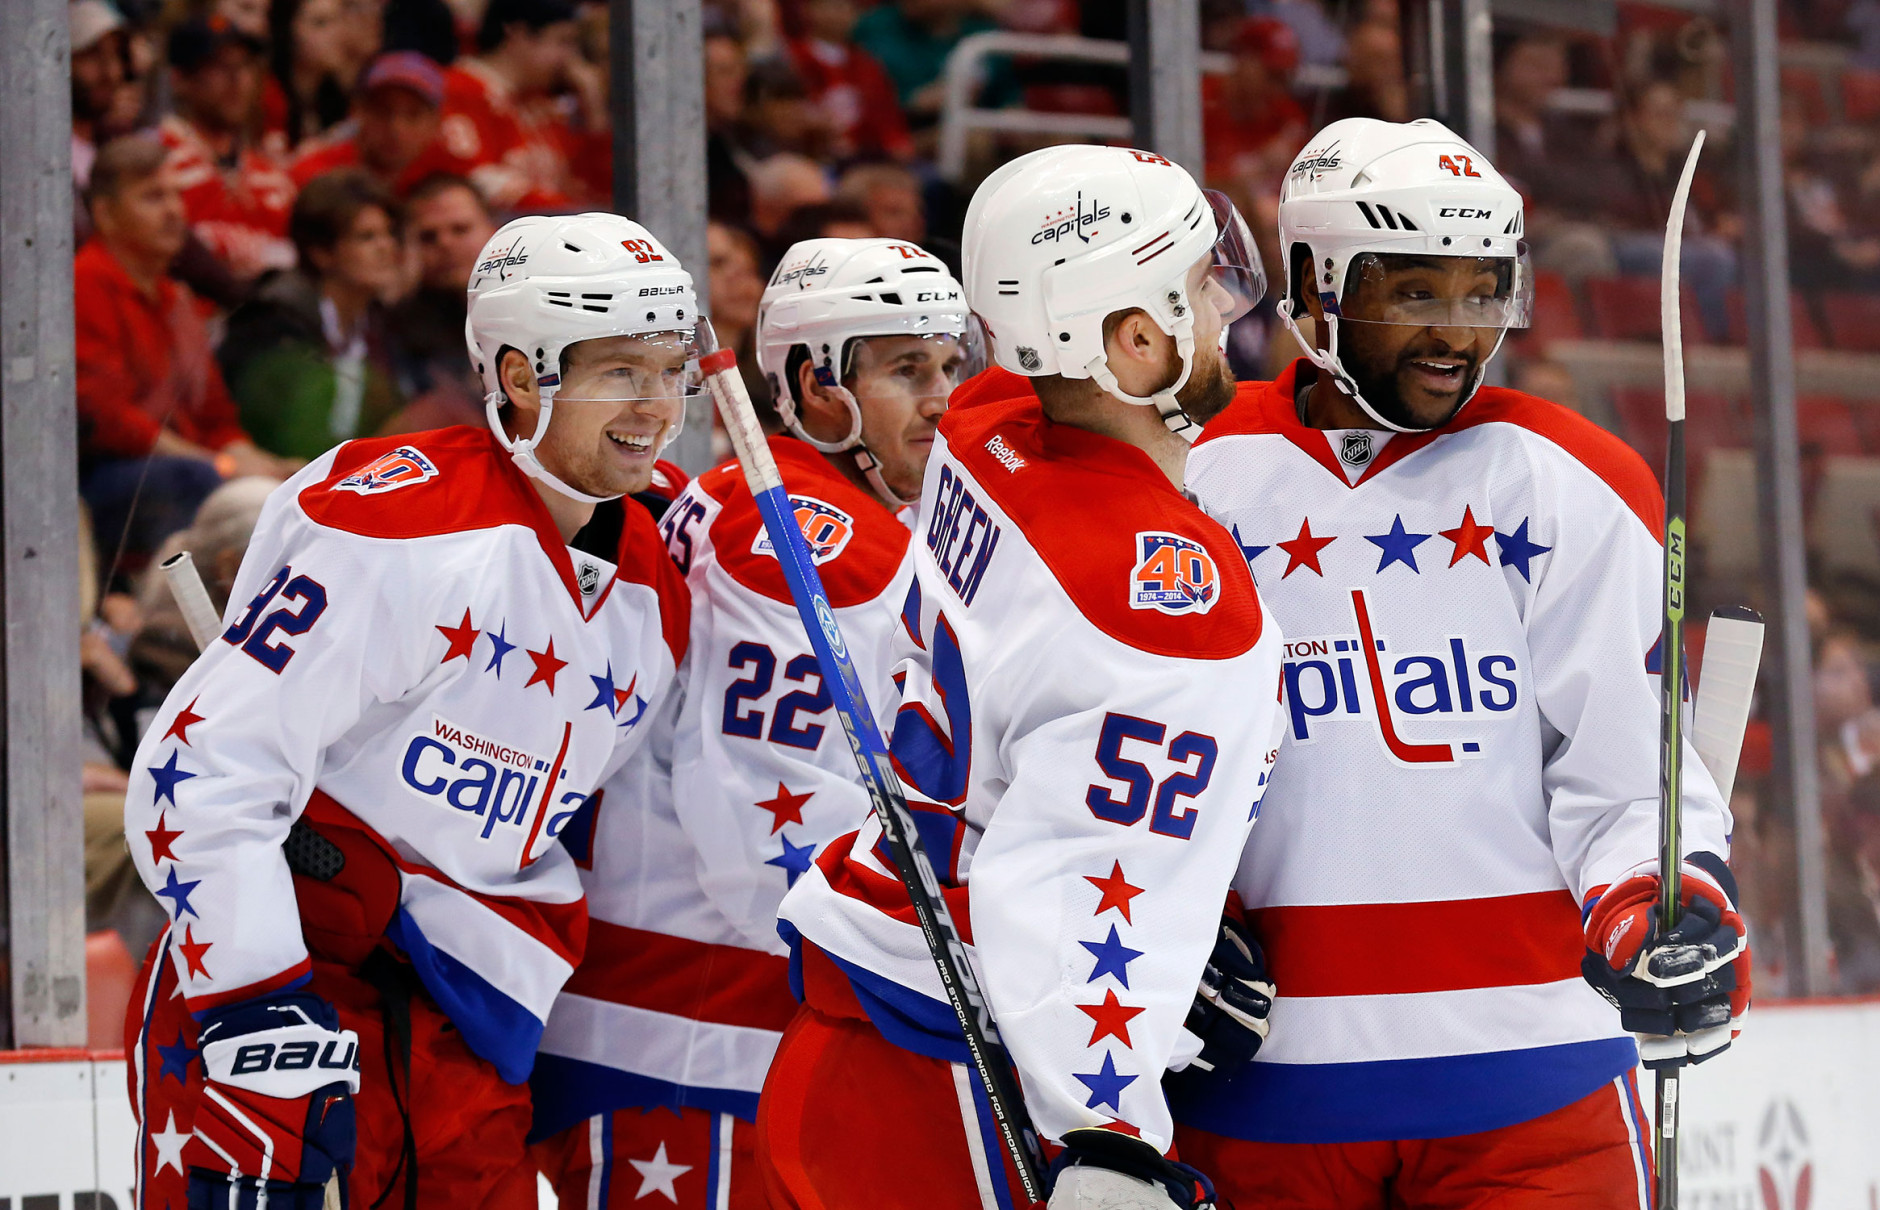 Favorite Photos from the Capitals 2014-2015 Season